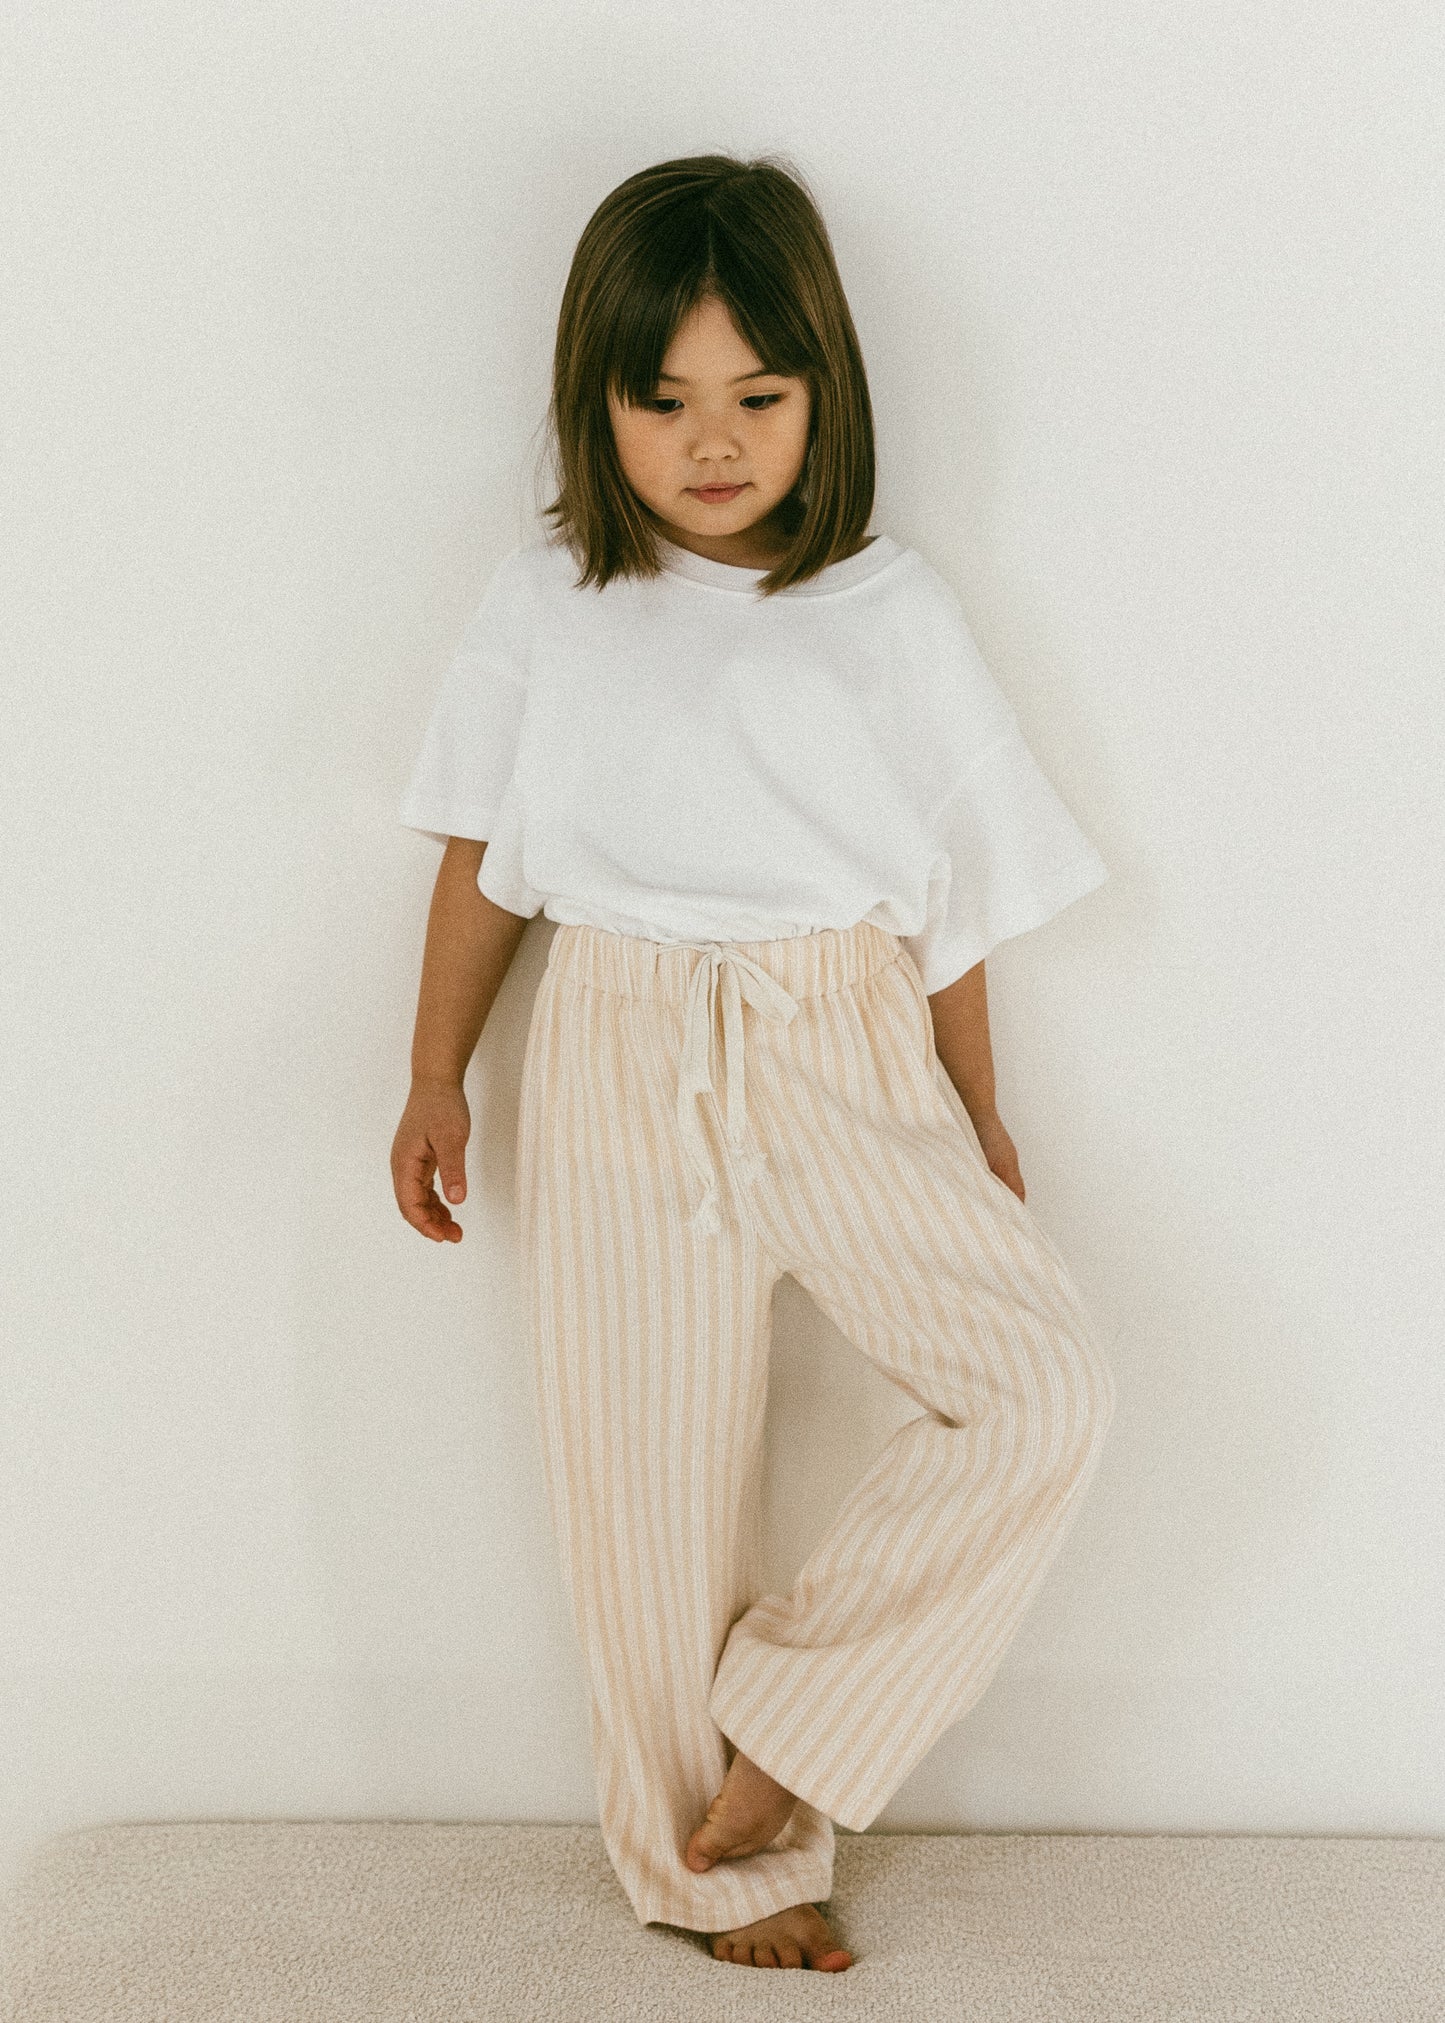 Striped Terry Pants- Beige